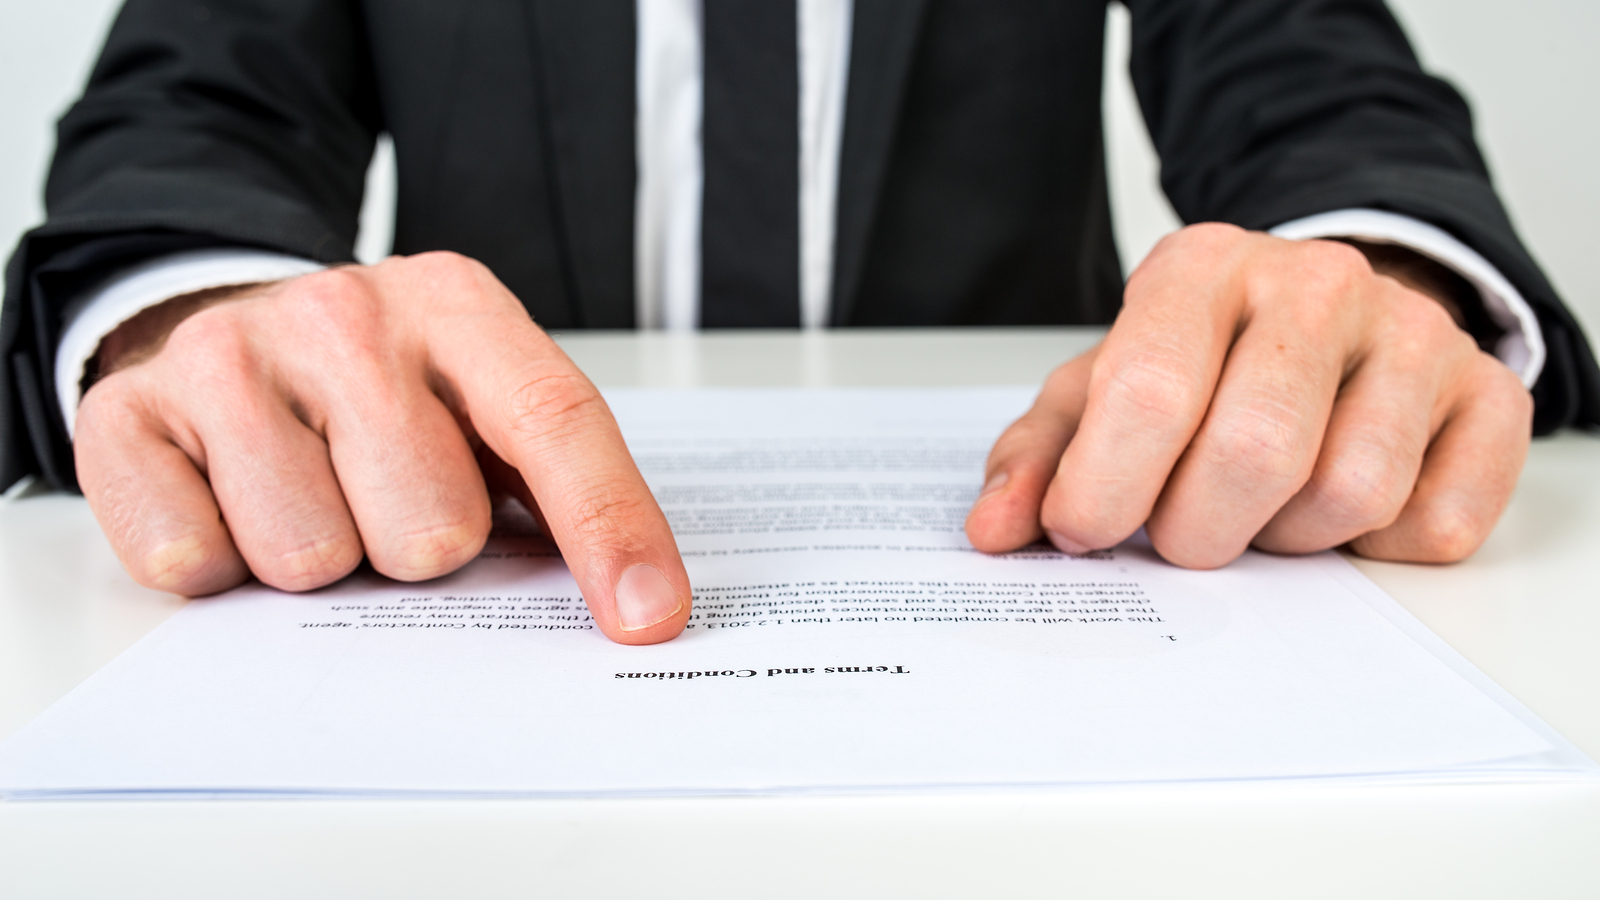 explaining terms and conditions of a real estate contract